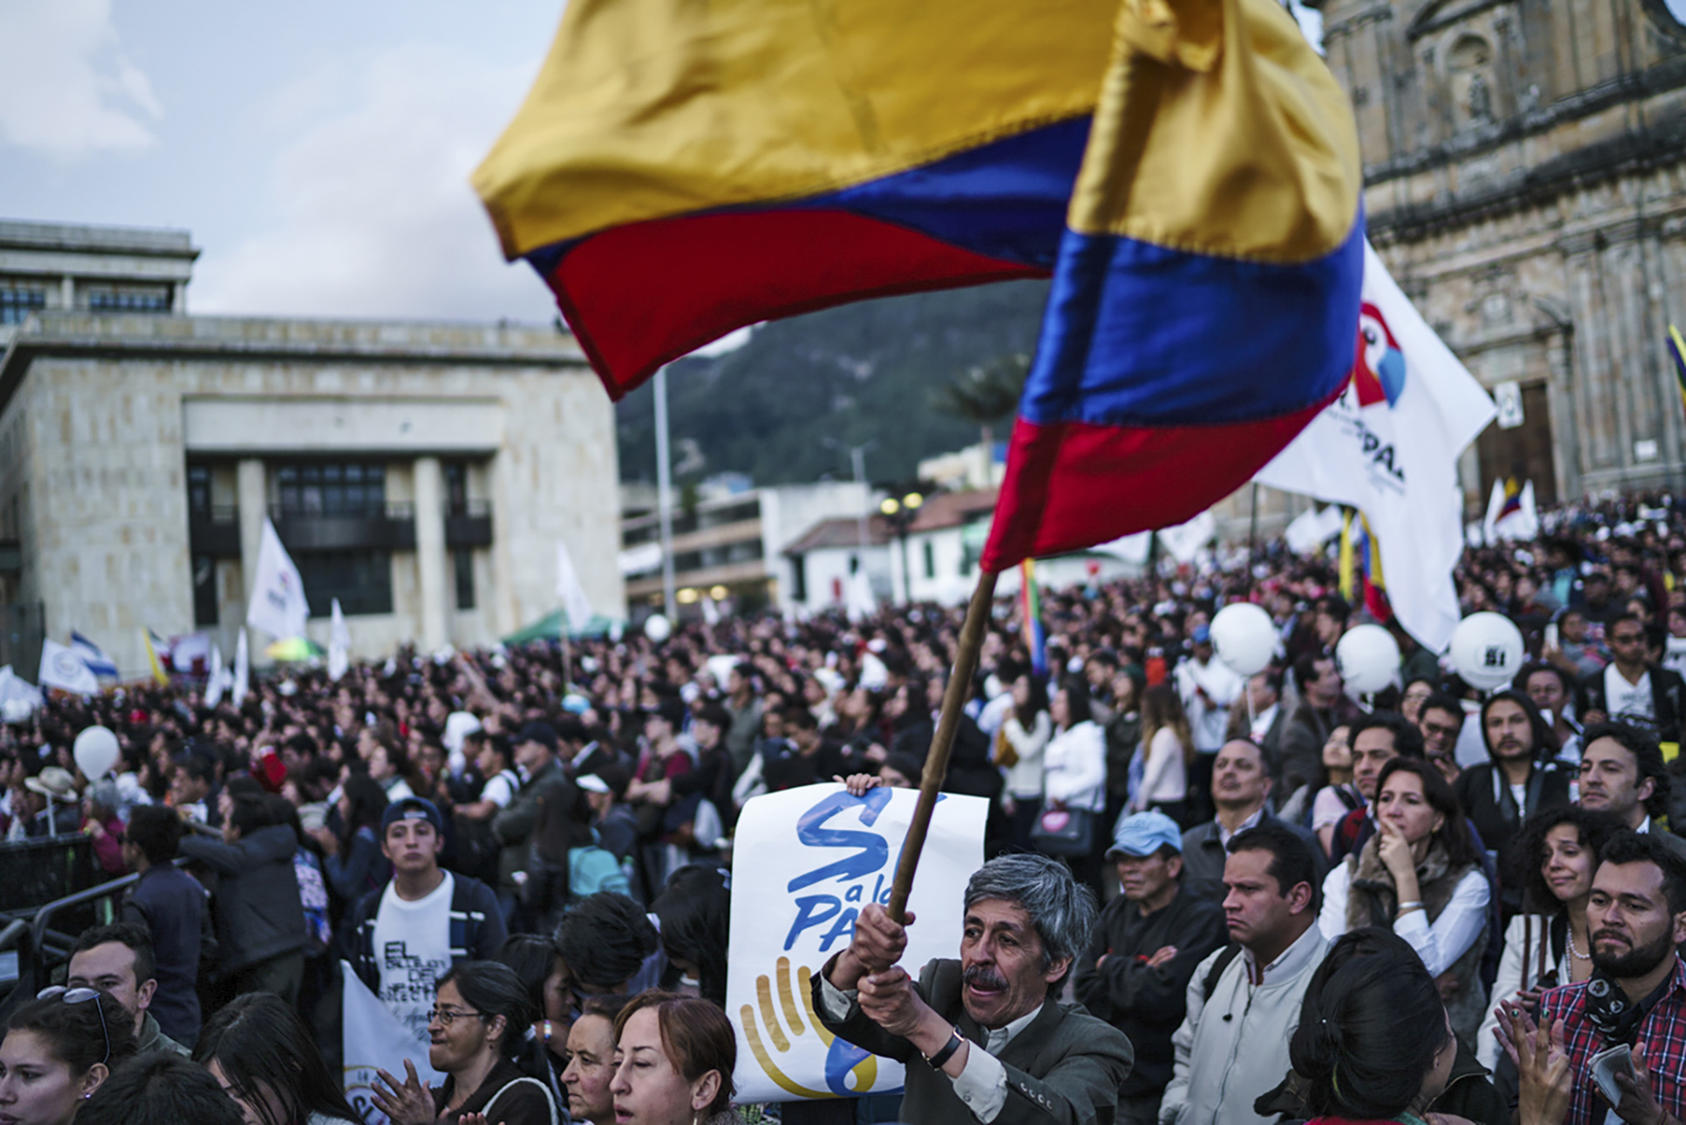 A celebration in Bolivar Square of the signing of a peace agreement between the Colombian government and the Revolutionary Armed Forces of Colombia, or FARC, in Bogota, Sept. 26, 2016. (Federico Rios Escobar/The New York Times)